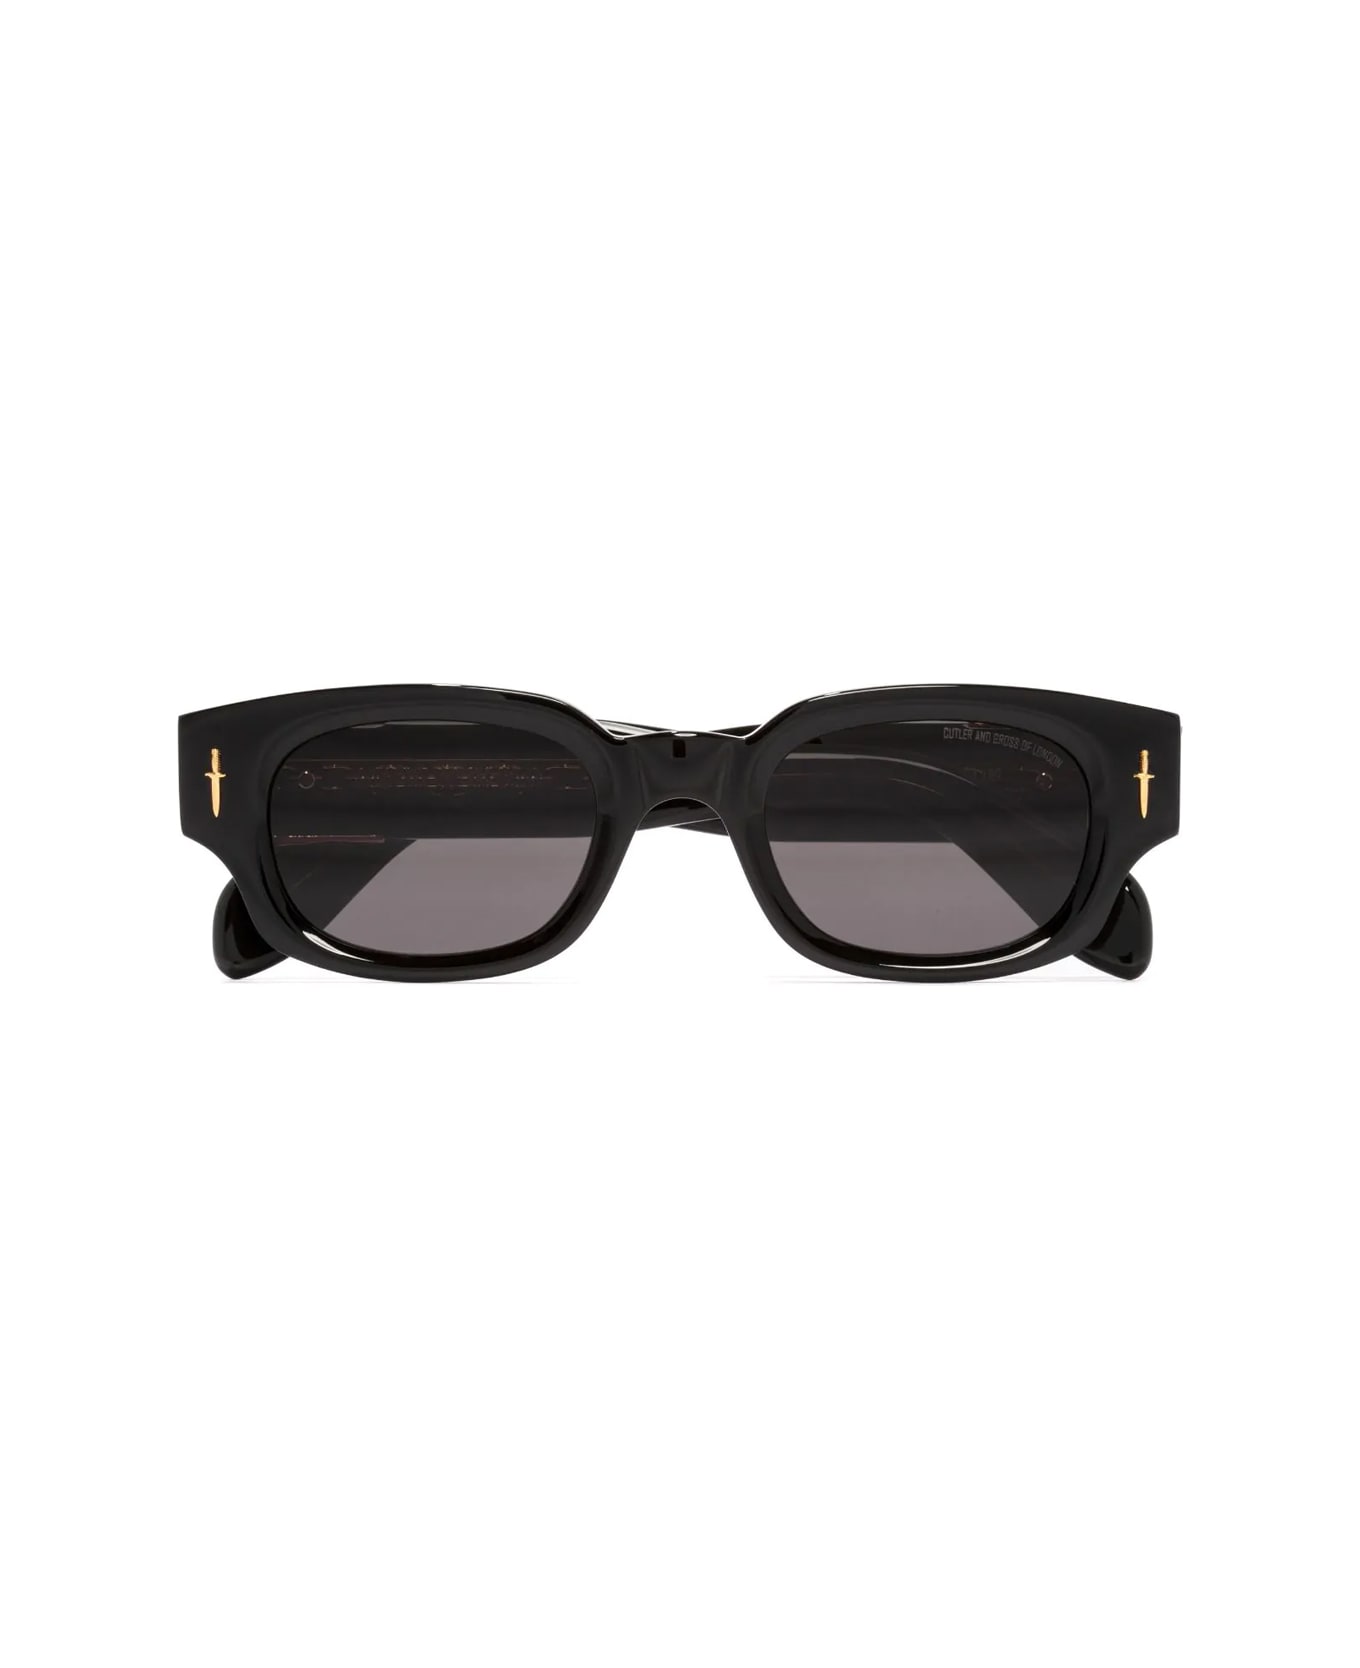 Cutler and Gross Great Frog 004 01 Gold Sunglasses - Nero サングラス